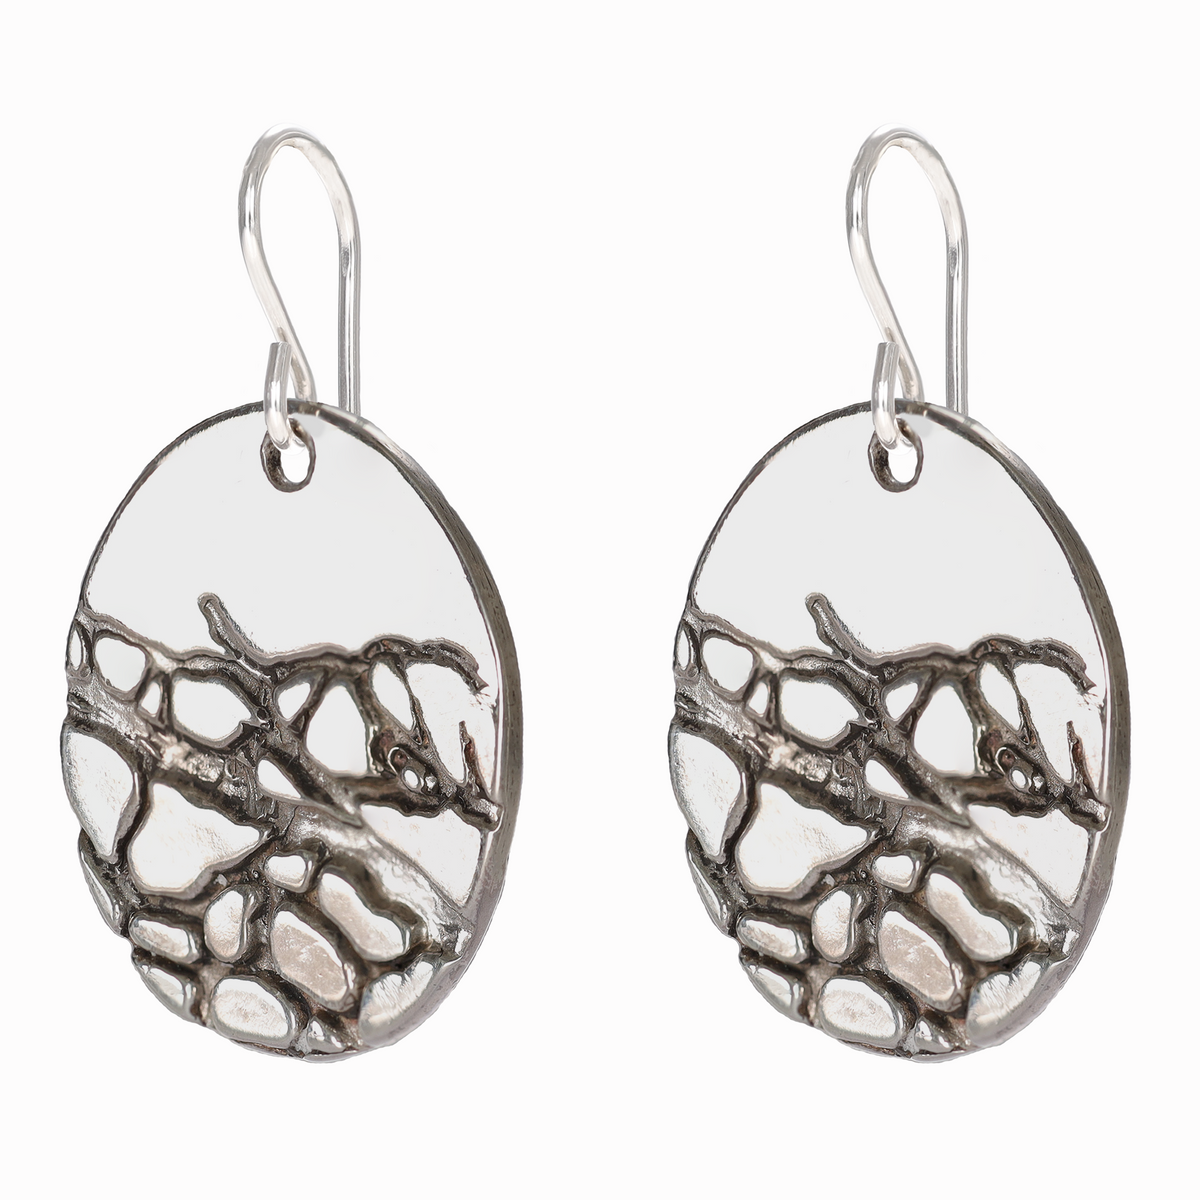 Cactus Skeleton Textured Large Sterling Silver Earrings on Short Ear Wires